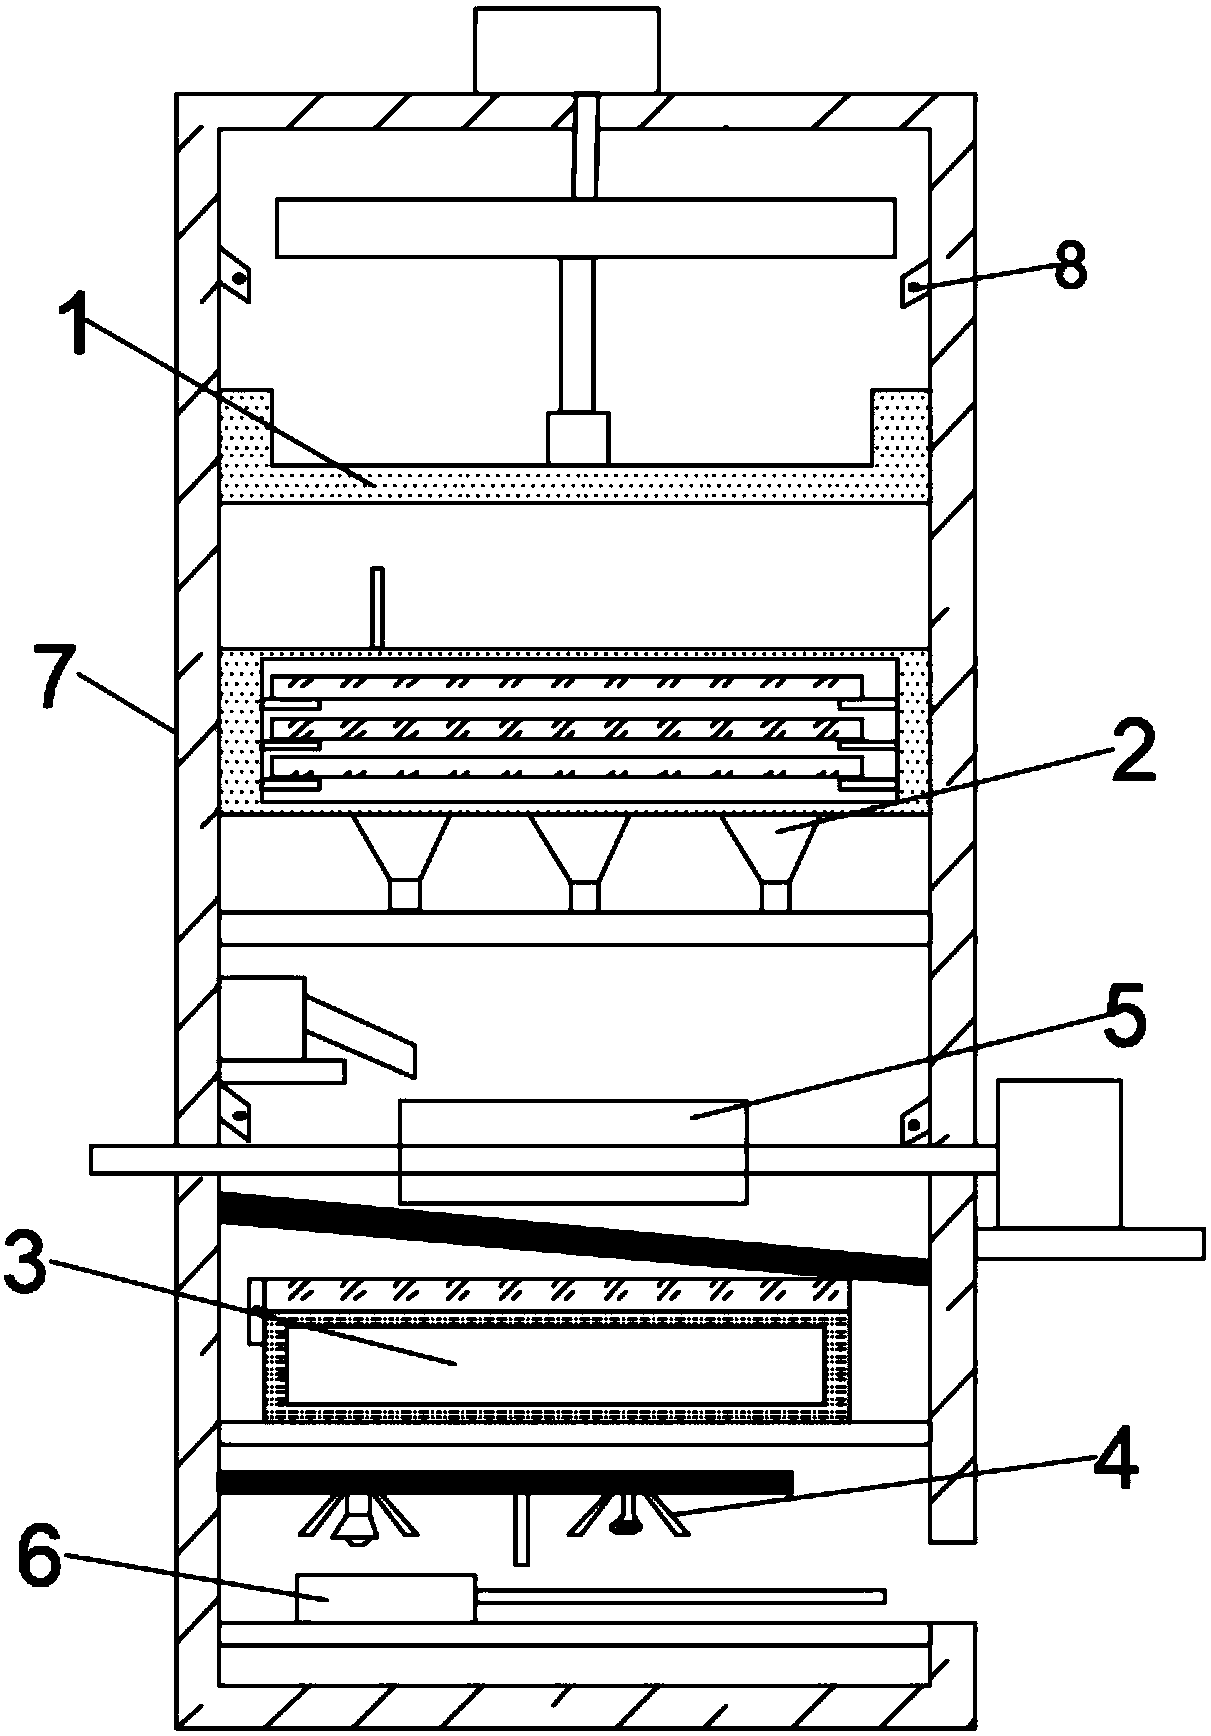 Disinfection and sterilization device applied to general surgical operation instruments